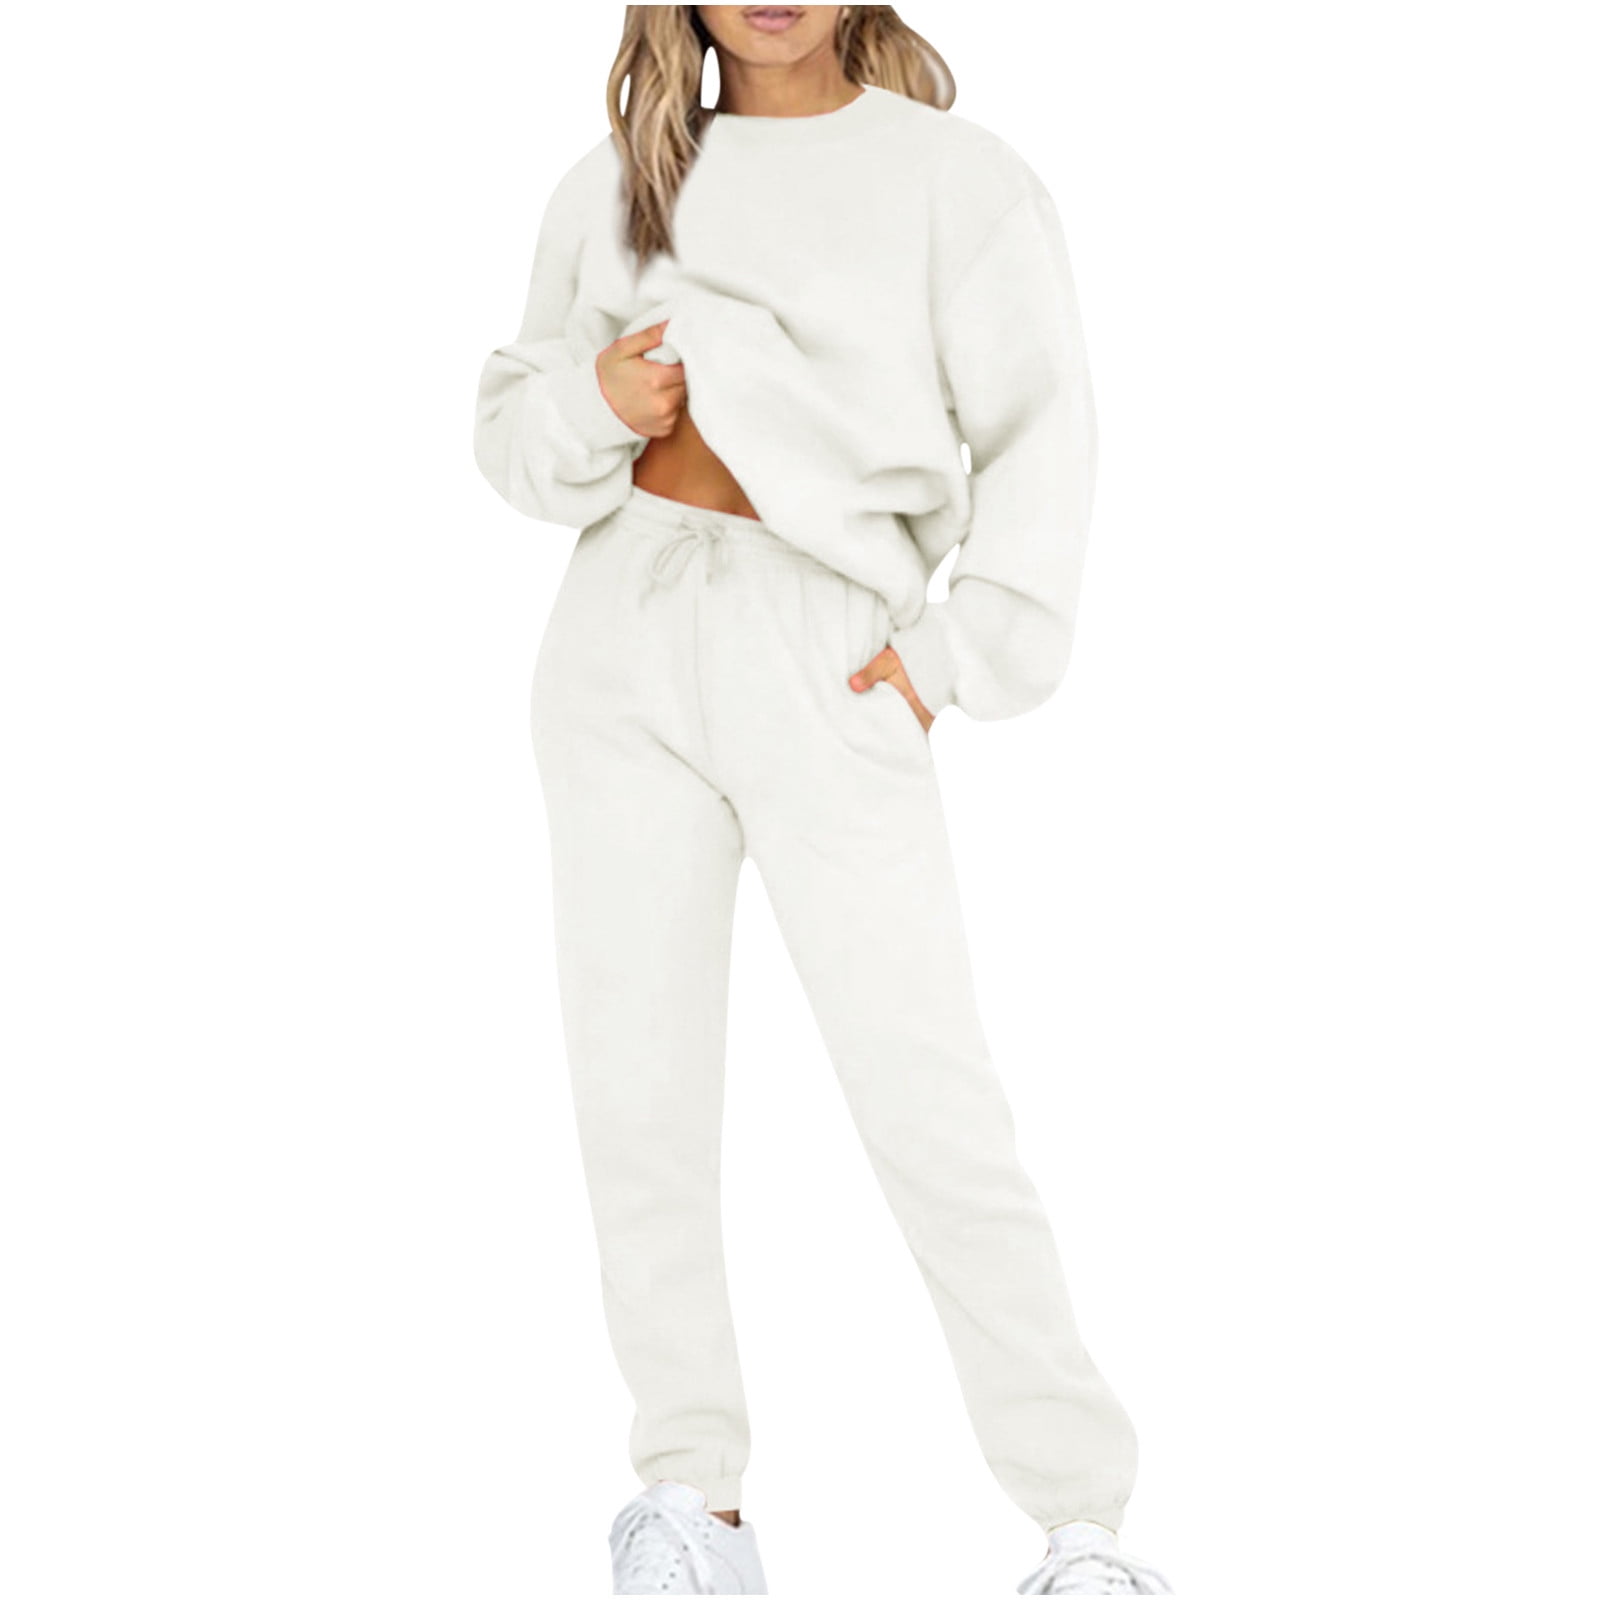 Reduced RQYYD Joggers for Women 2 Piece Set Long Sleeve Pullover  Sweatshirts and Sweatpants Outfits Active Wear Solid Casual Tracksuit Set(White,XXL)  